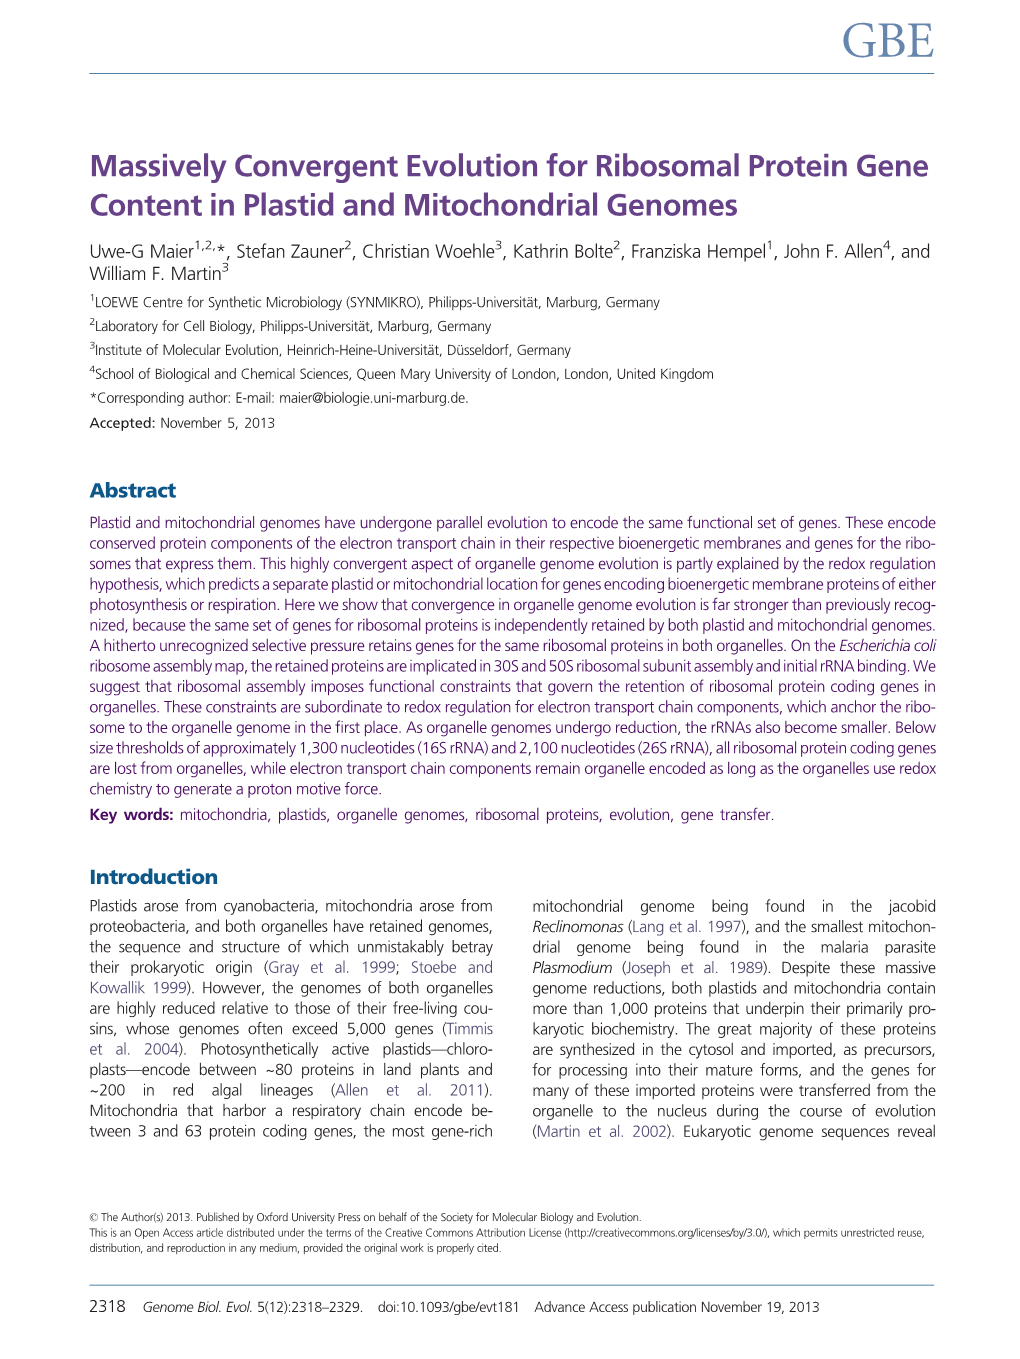 Massively Convergent Evolution for Ribosomal Protein Gene Content in Plastid and Mitochondrial Genomes